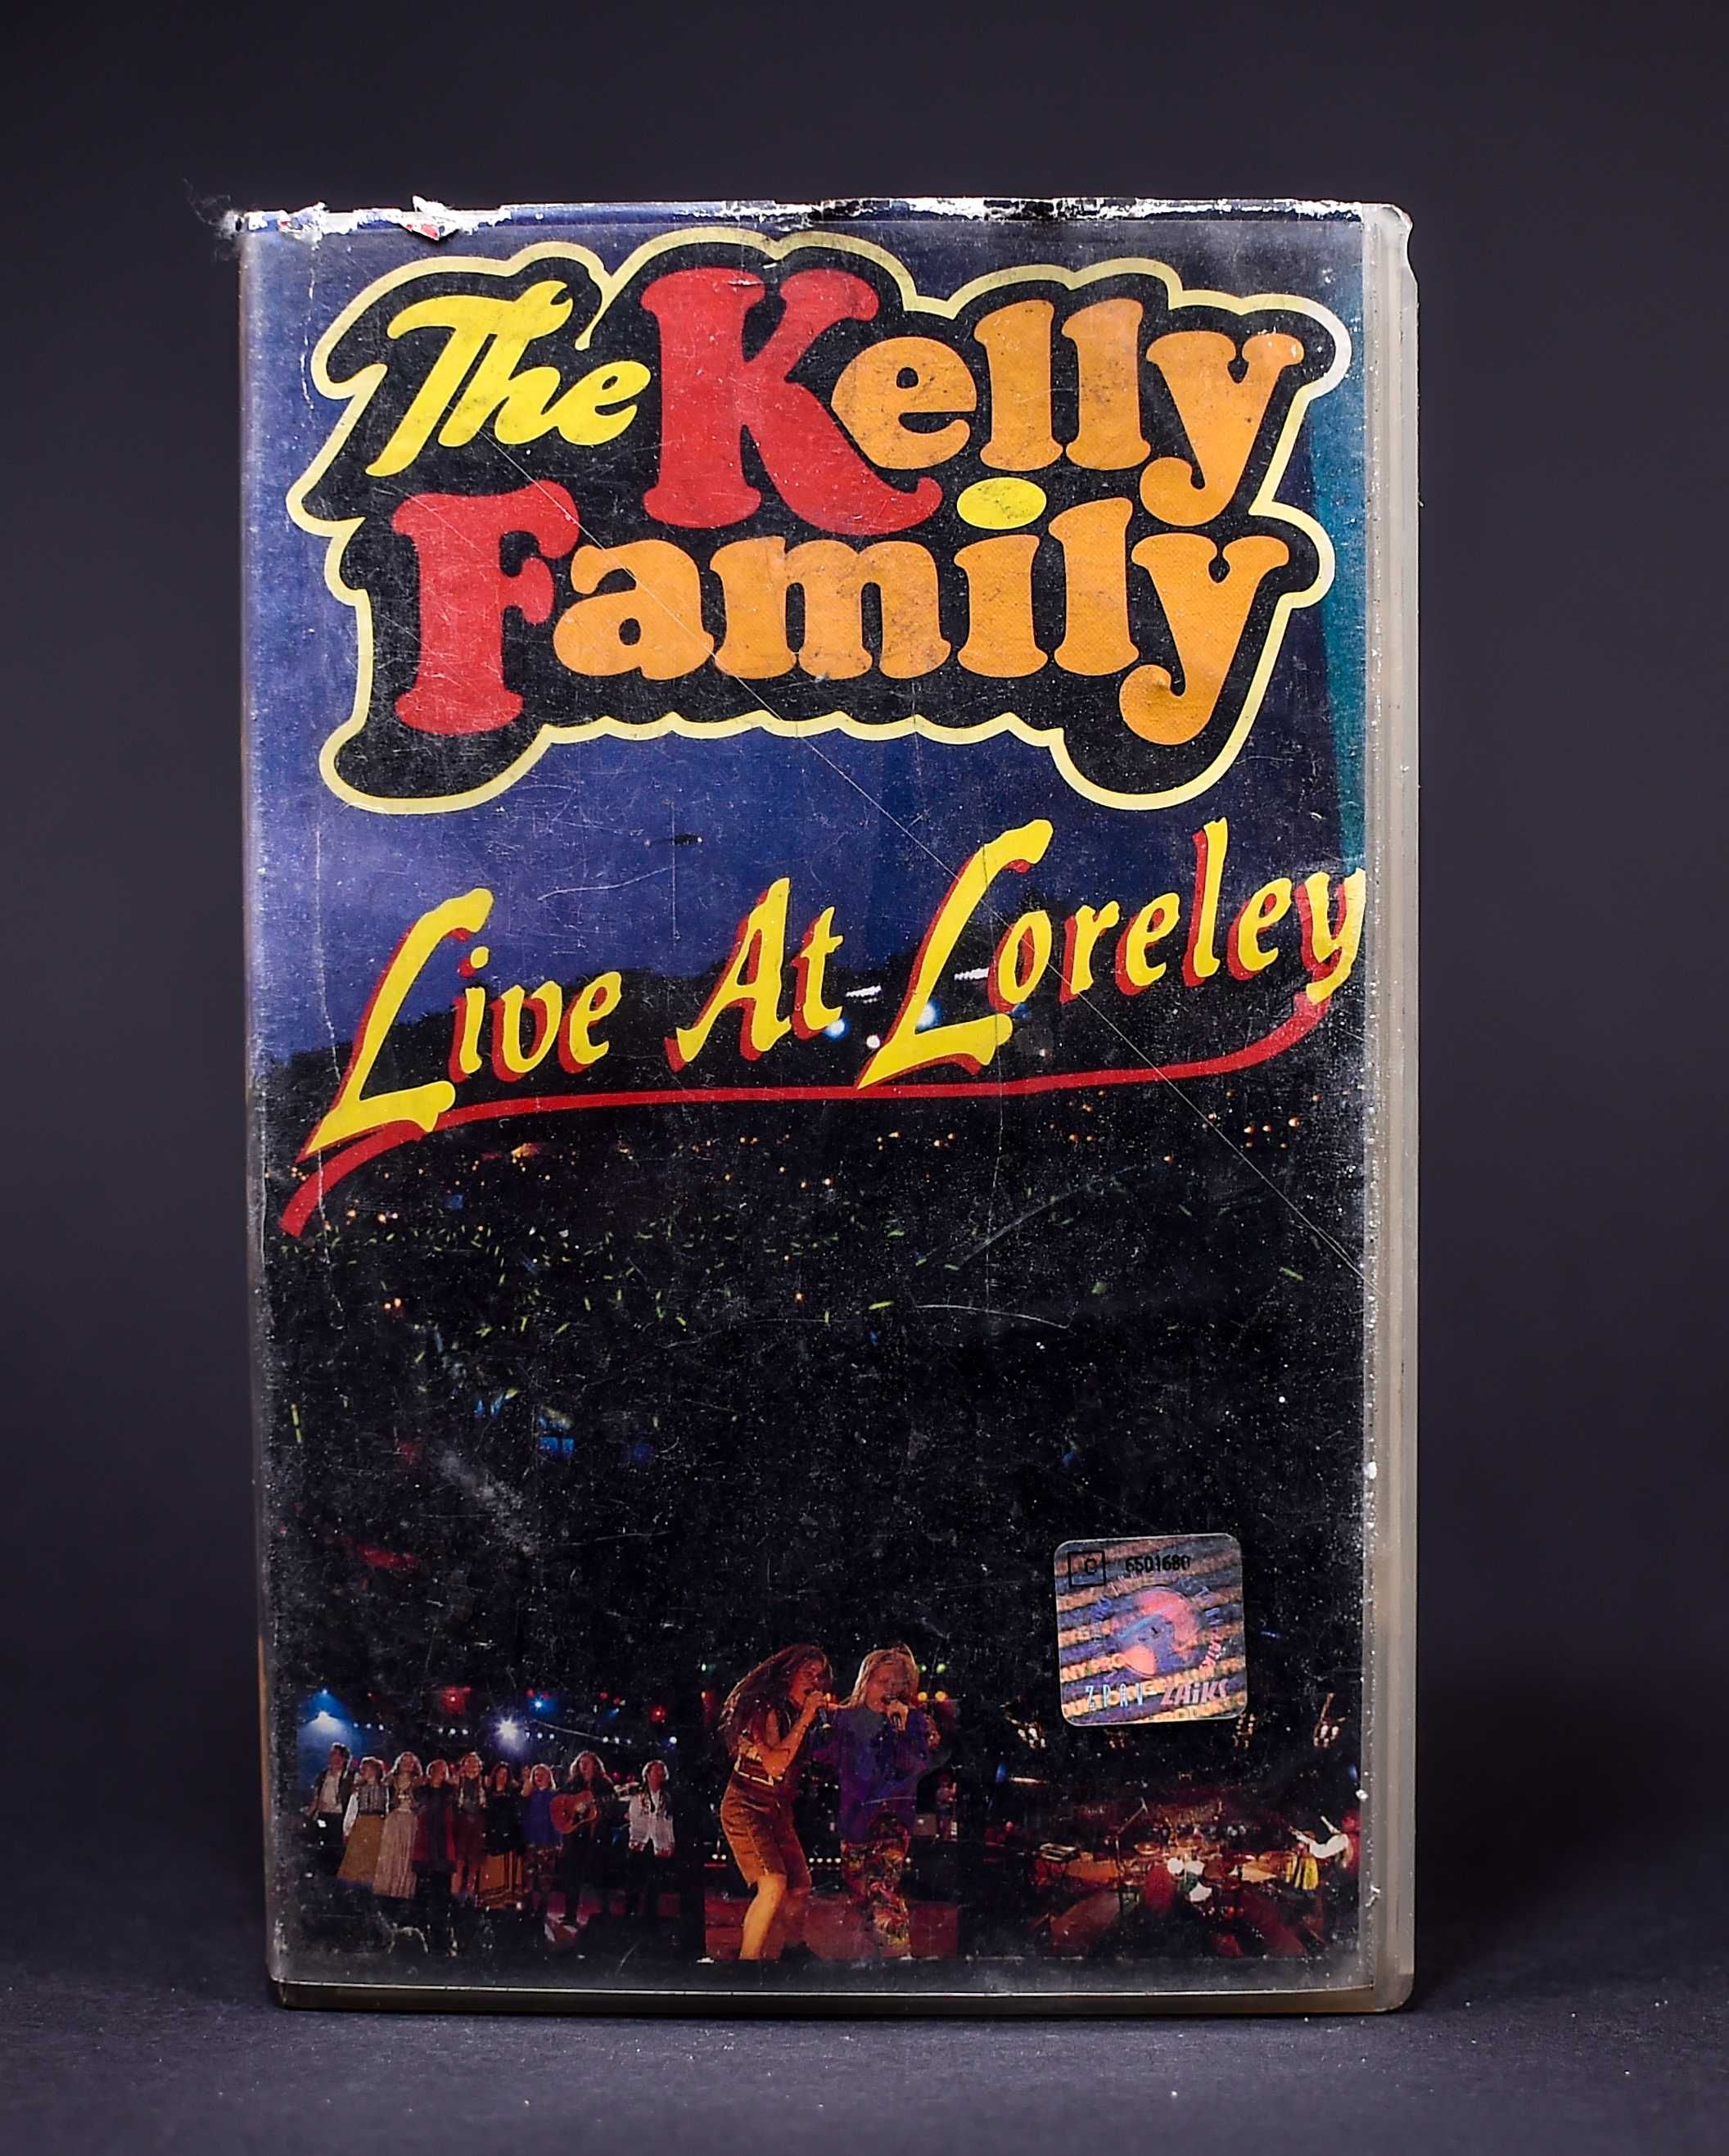 VHS # The Kelly Familly Live At Loreley